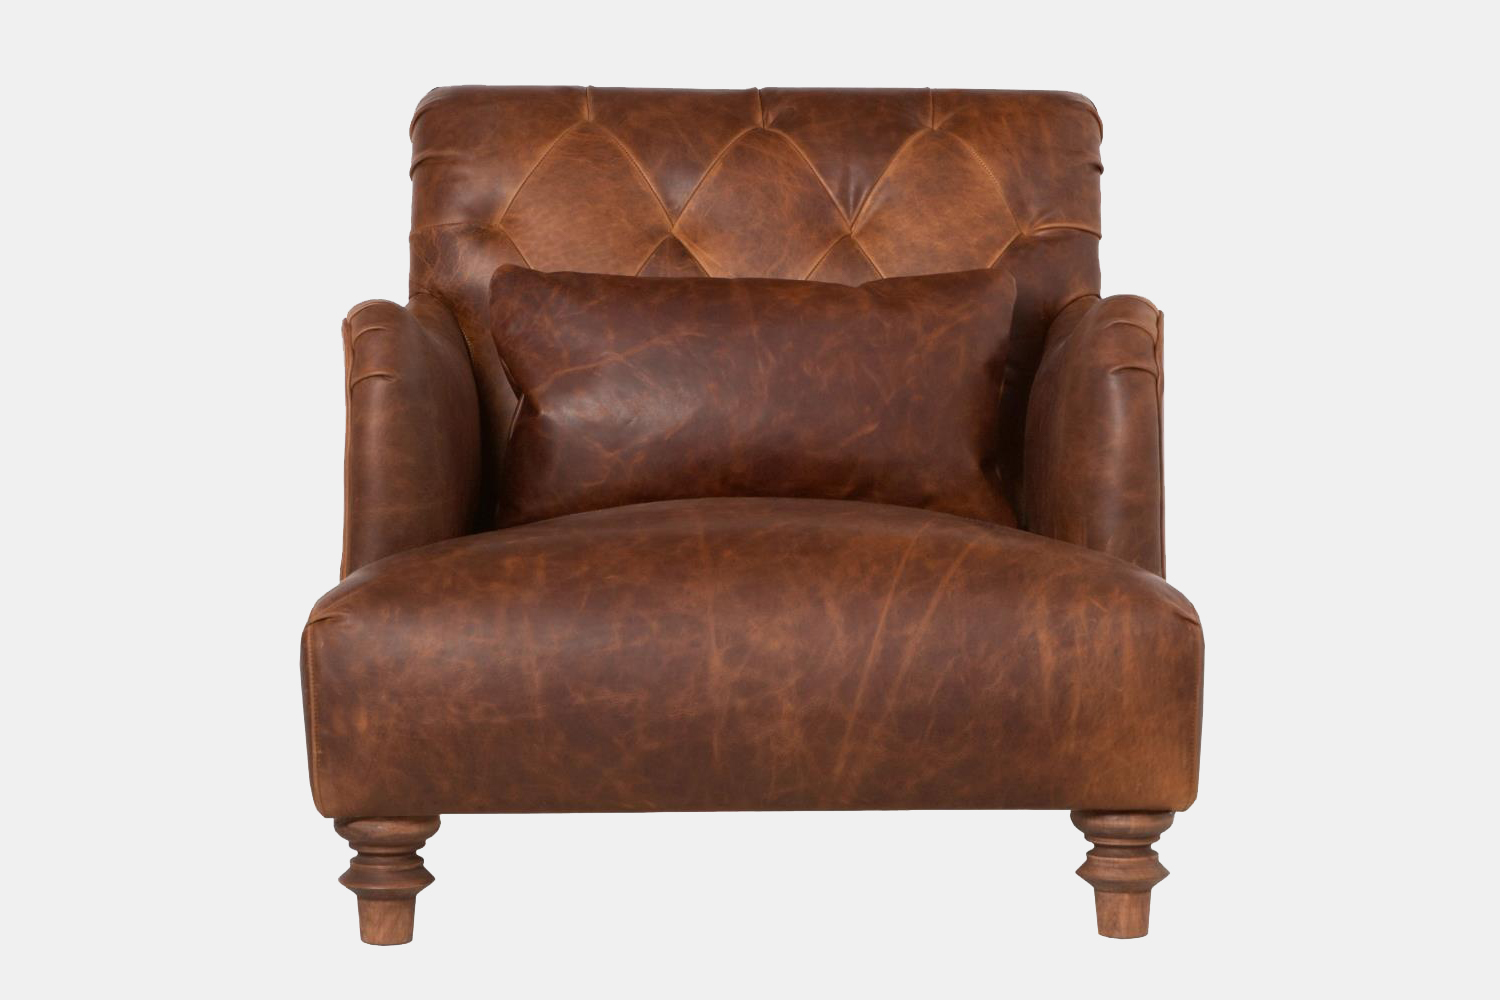 Cisco Acacia Chair in brown leather